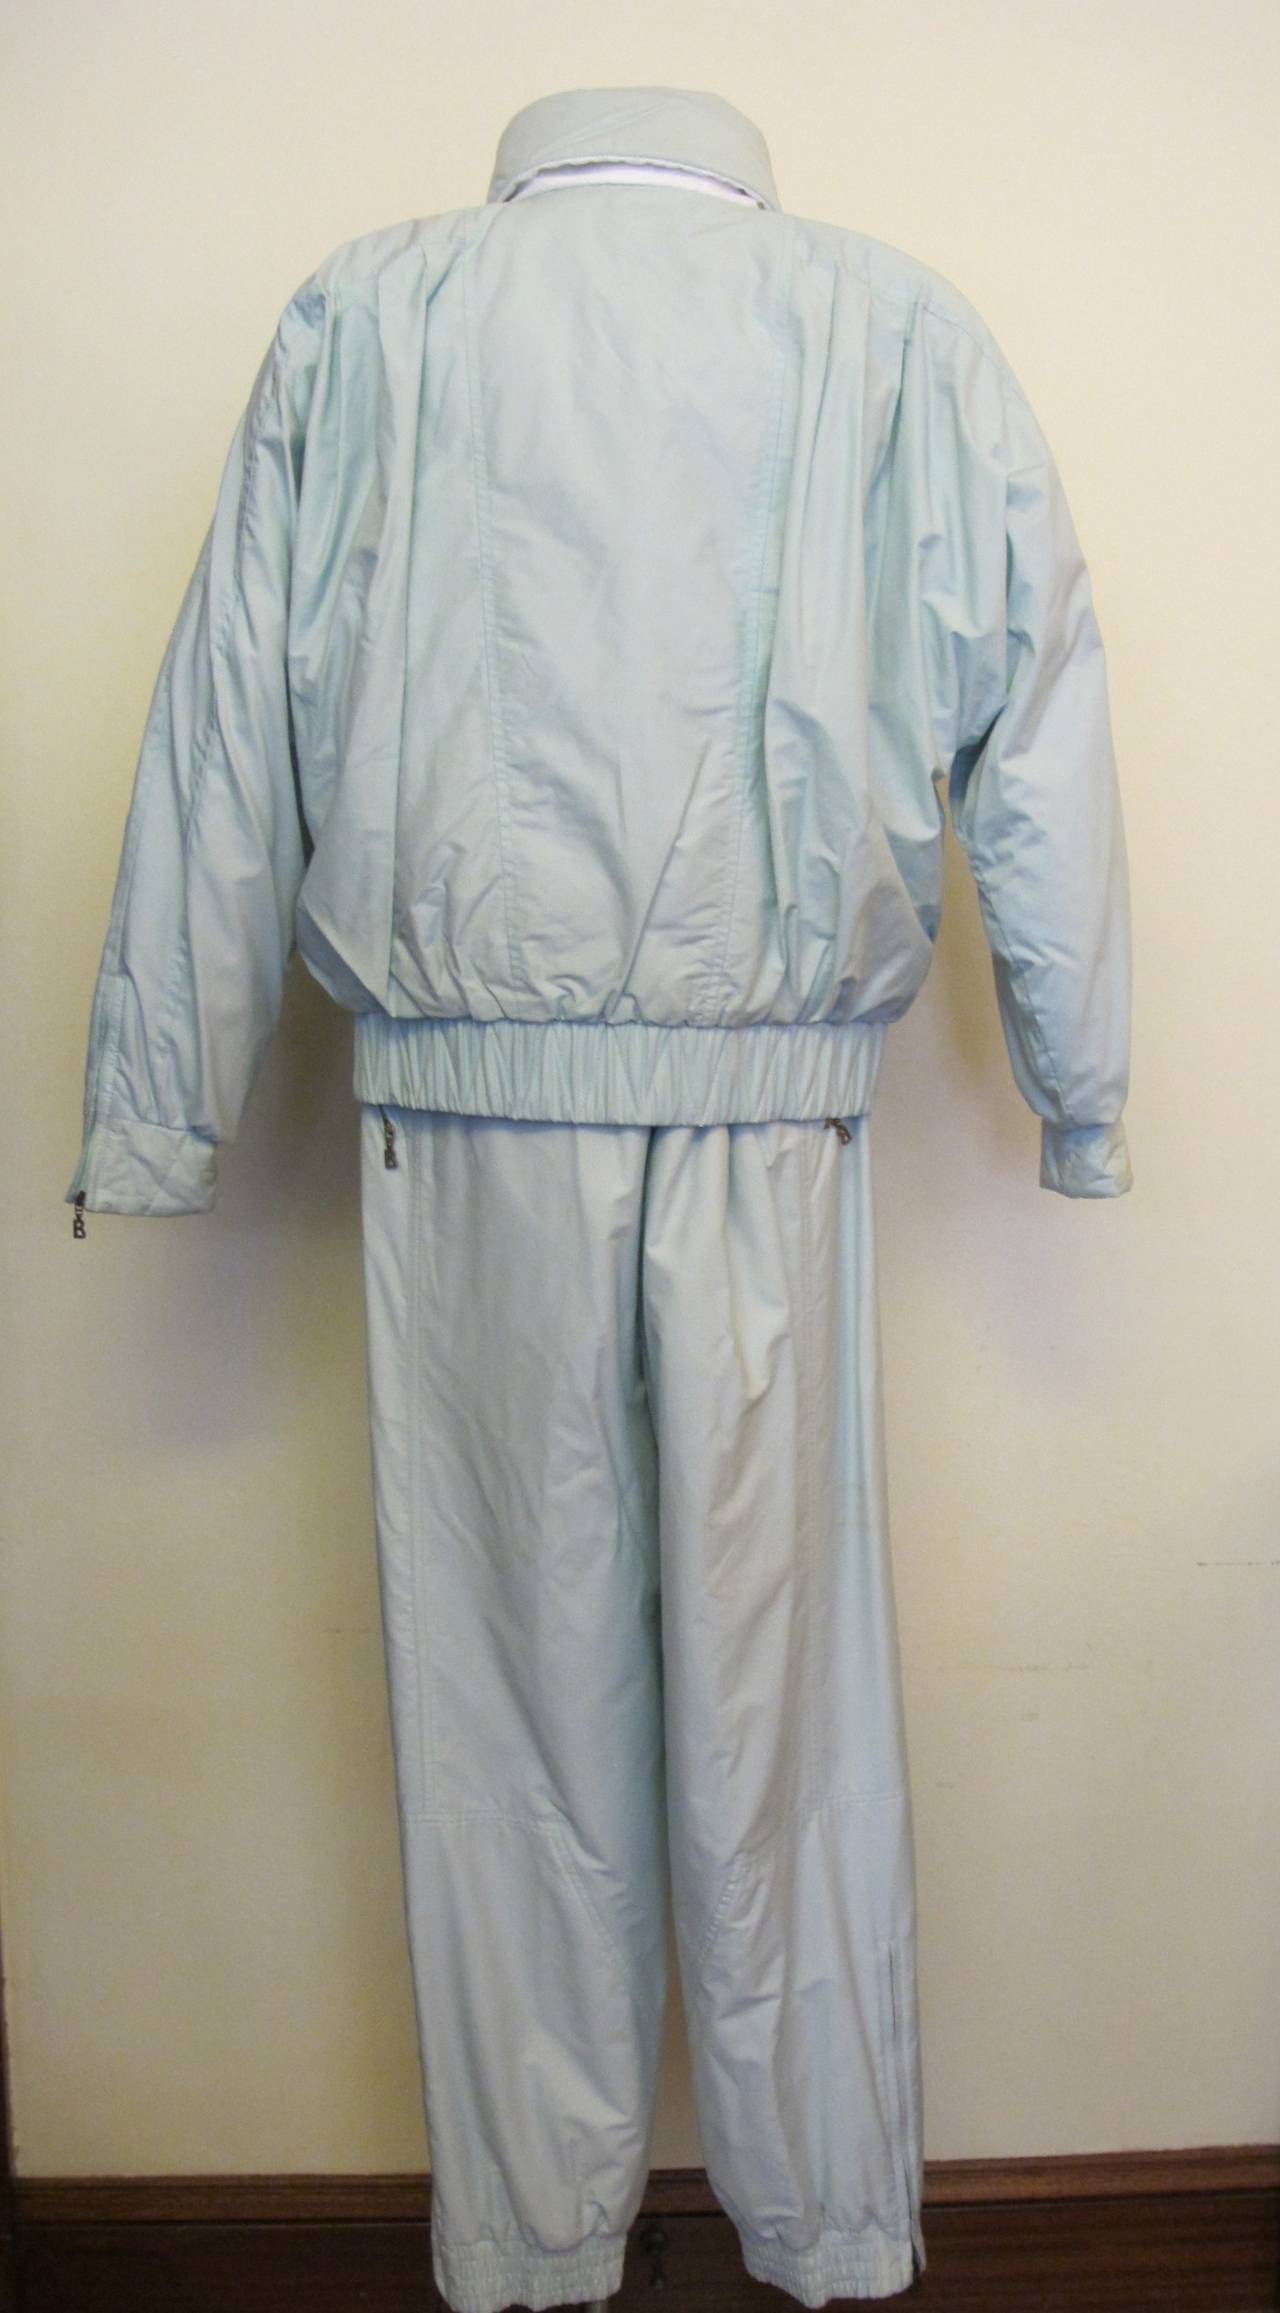 This ski suit is goose down filled. The sky blue color of this ski suit is heavenly. The jacket has a continuous sleeve with 2 zippered pockets with a zipper in front of the overlap and 2 zippers - one on each sleeve. It was donated to Helpers by a